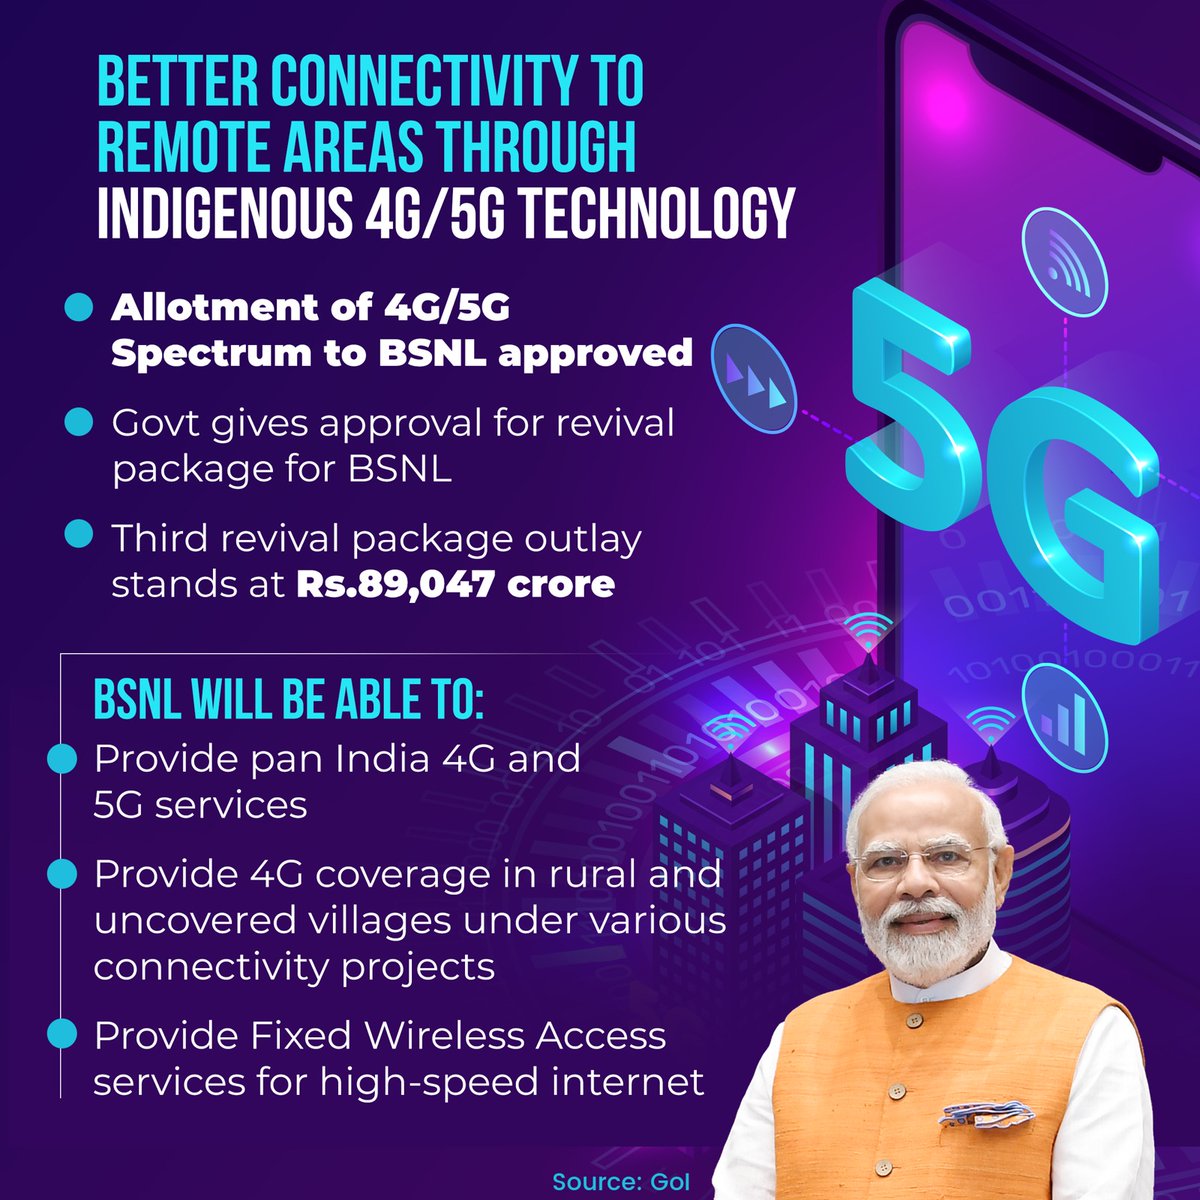 With an aim to provide better connectivity to remote areas, the Modi govt. approves the third Revival Package for BSNL.

#CabinetDecisions